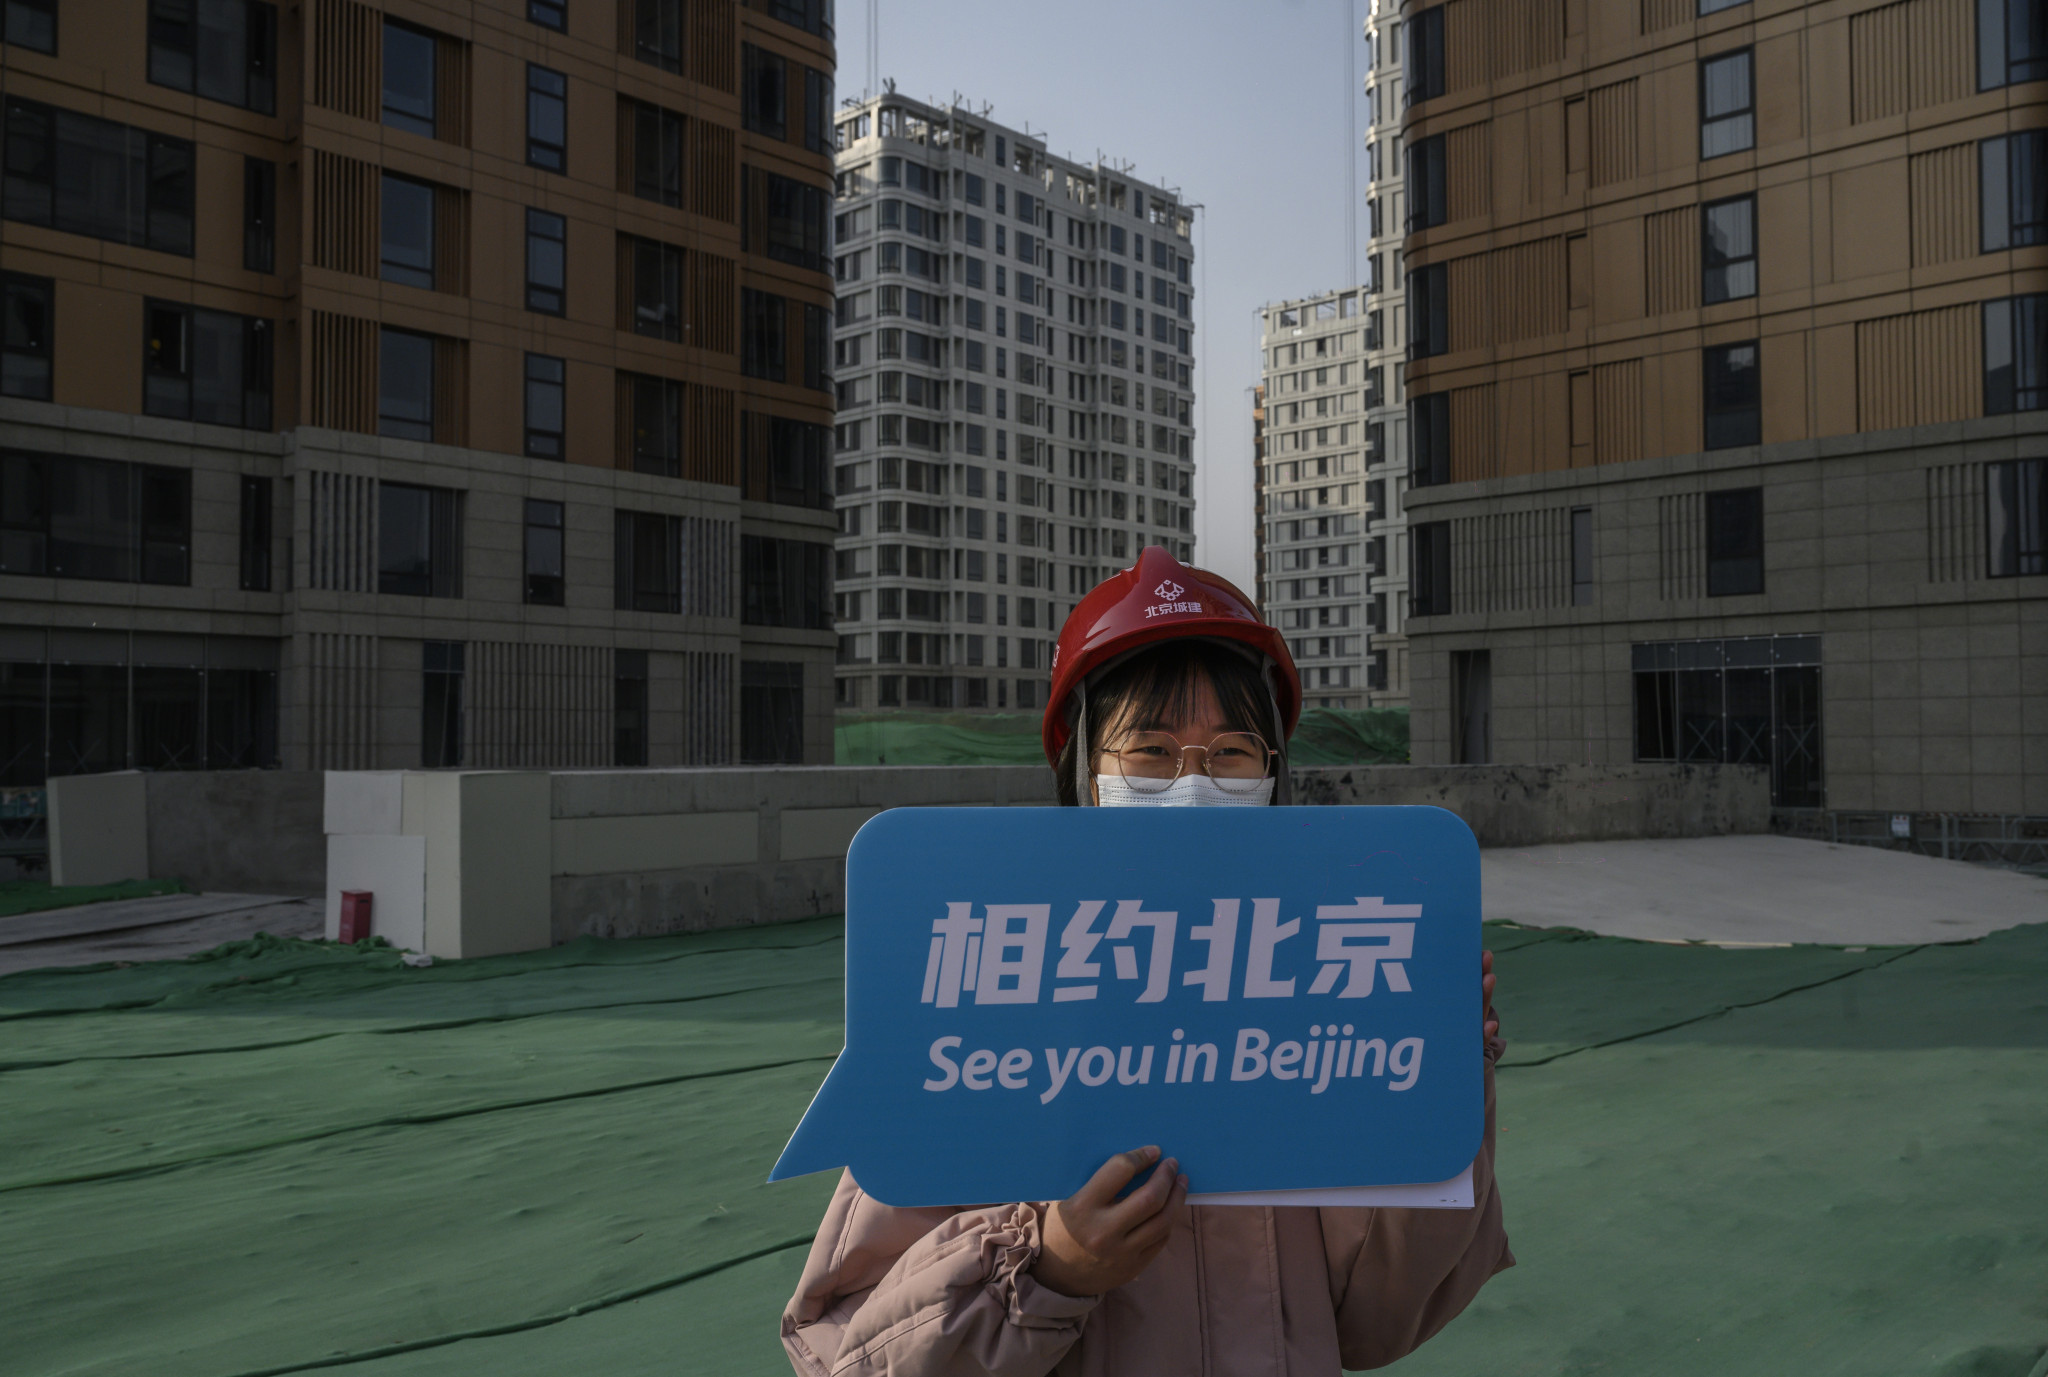 Beijing 2022 campaigners target world leaders after IOC "inaction"